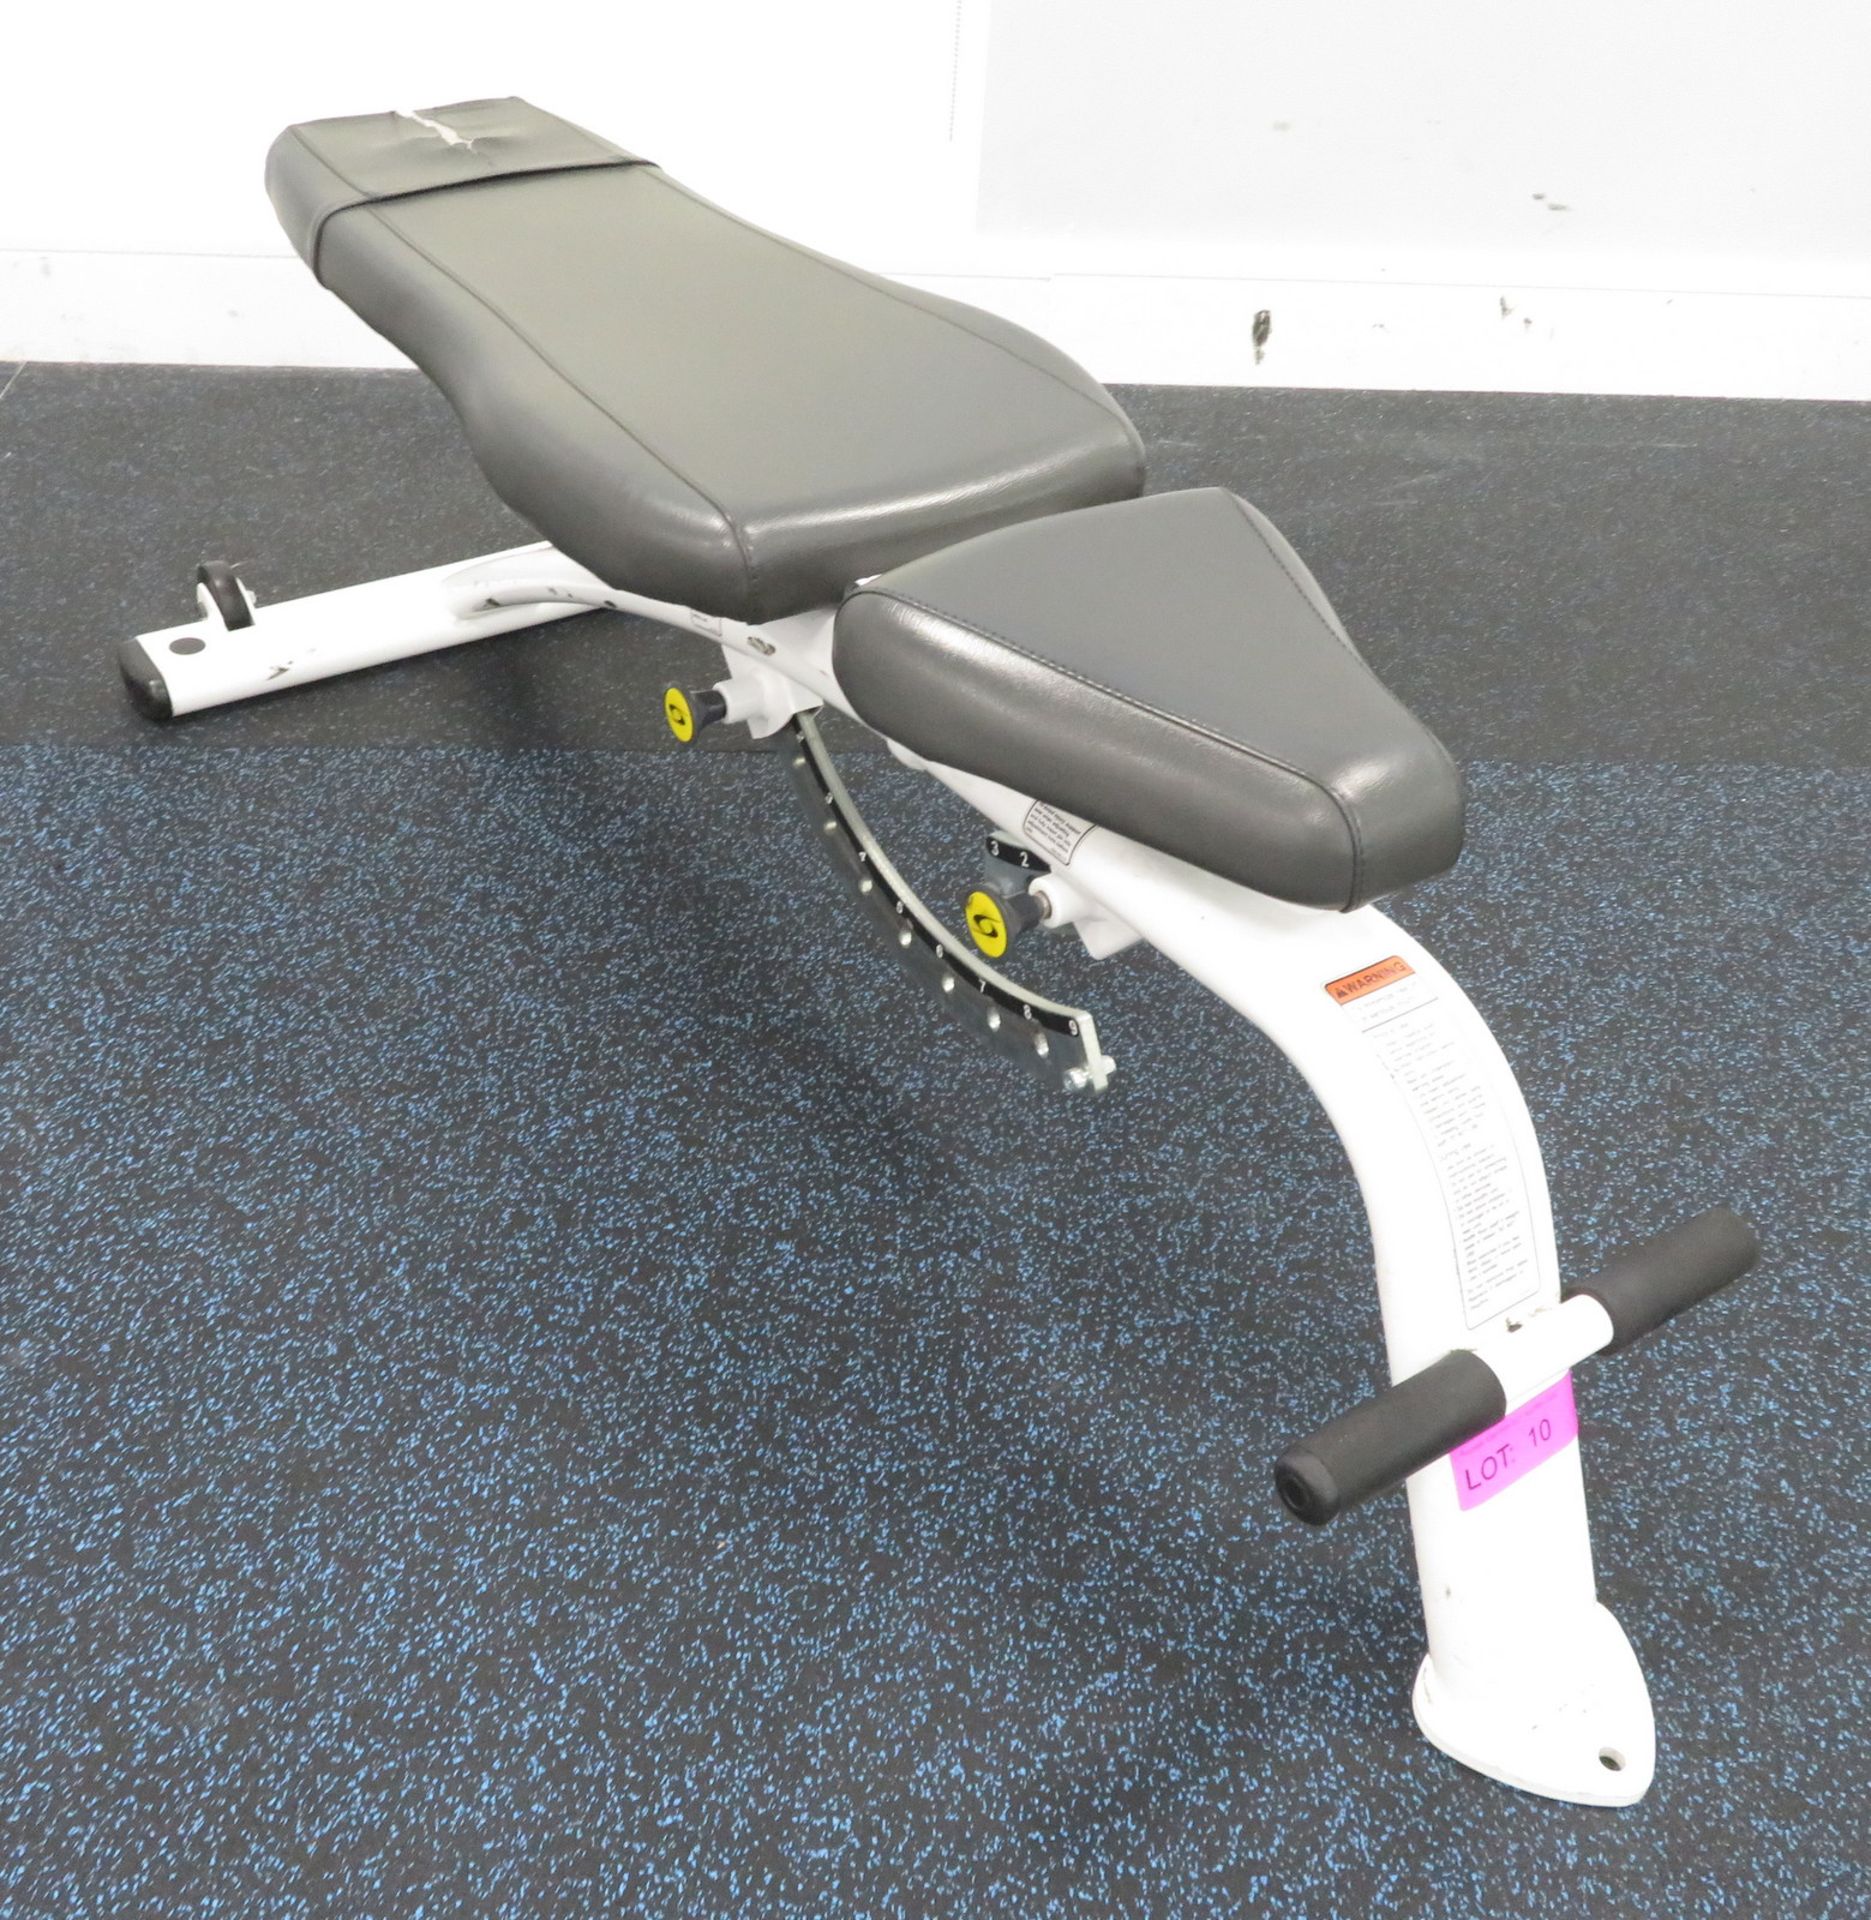 Cybex Adjustable Bench (Free-standing)1600 Dimensions: 63x140x45cm (LxDxH) - Image 3 of 7